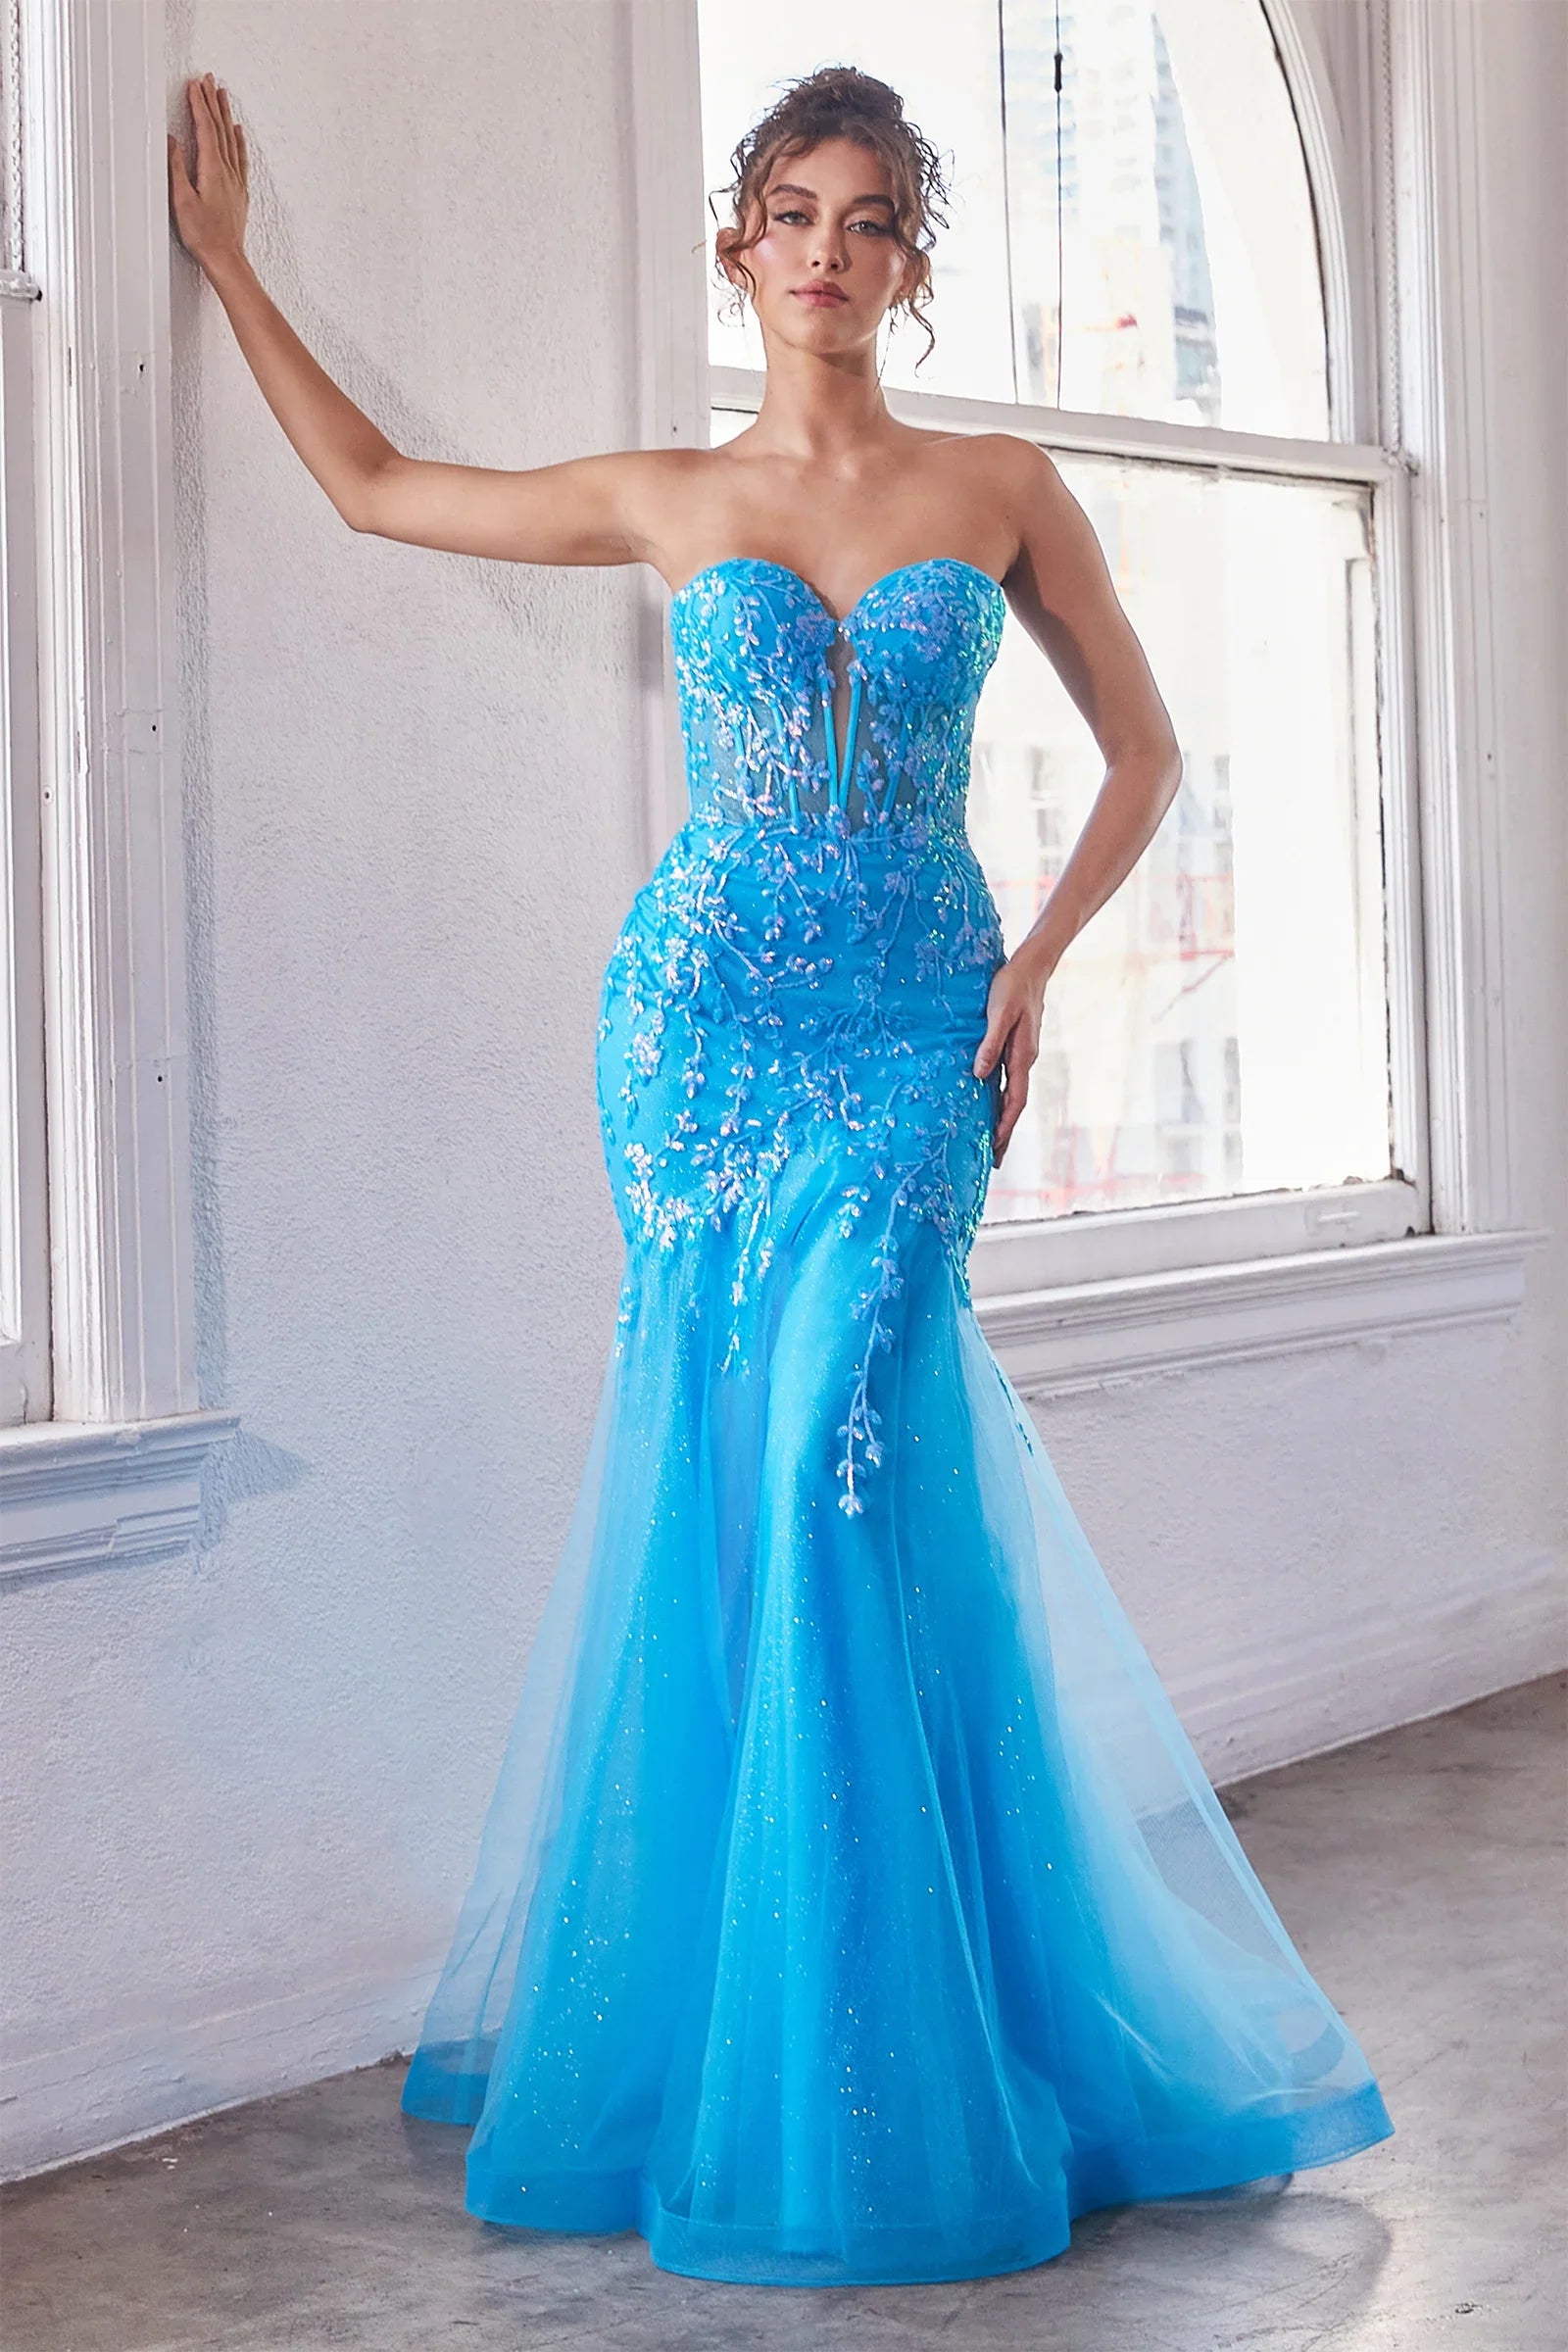 Long Sequin Formal Dress with Corset-Style Bodice